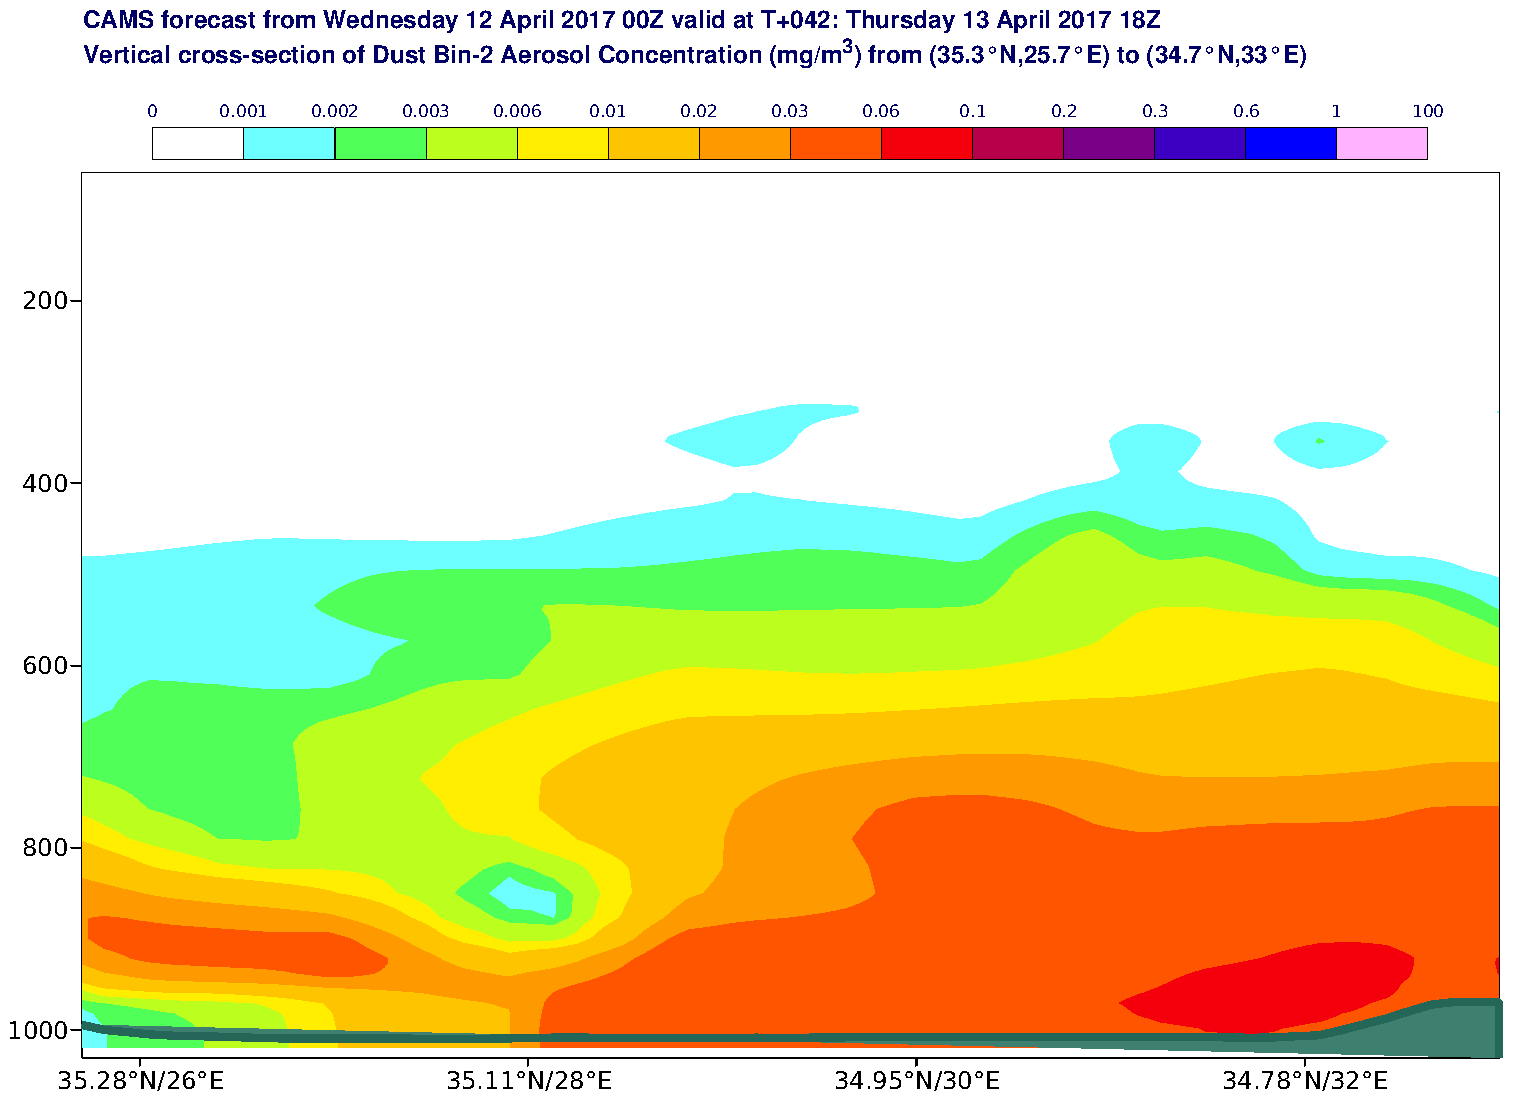 Vertical cross-section of Dust Bin-2 Aerosol Concentration (mg/m3) valid at T42 - 2017-04-13 18:00